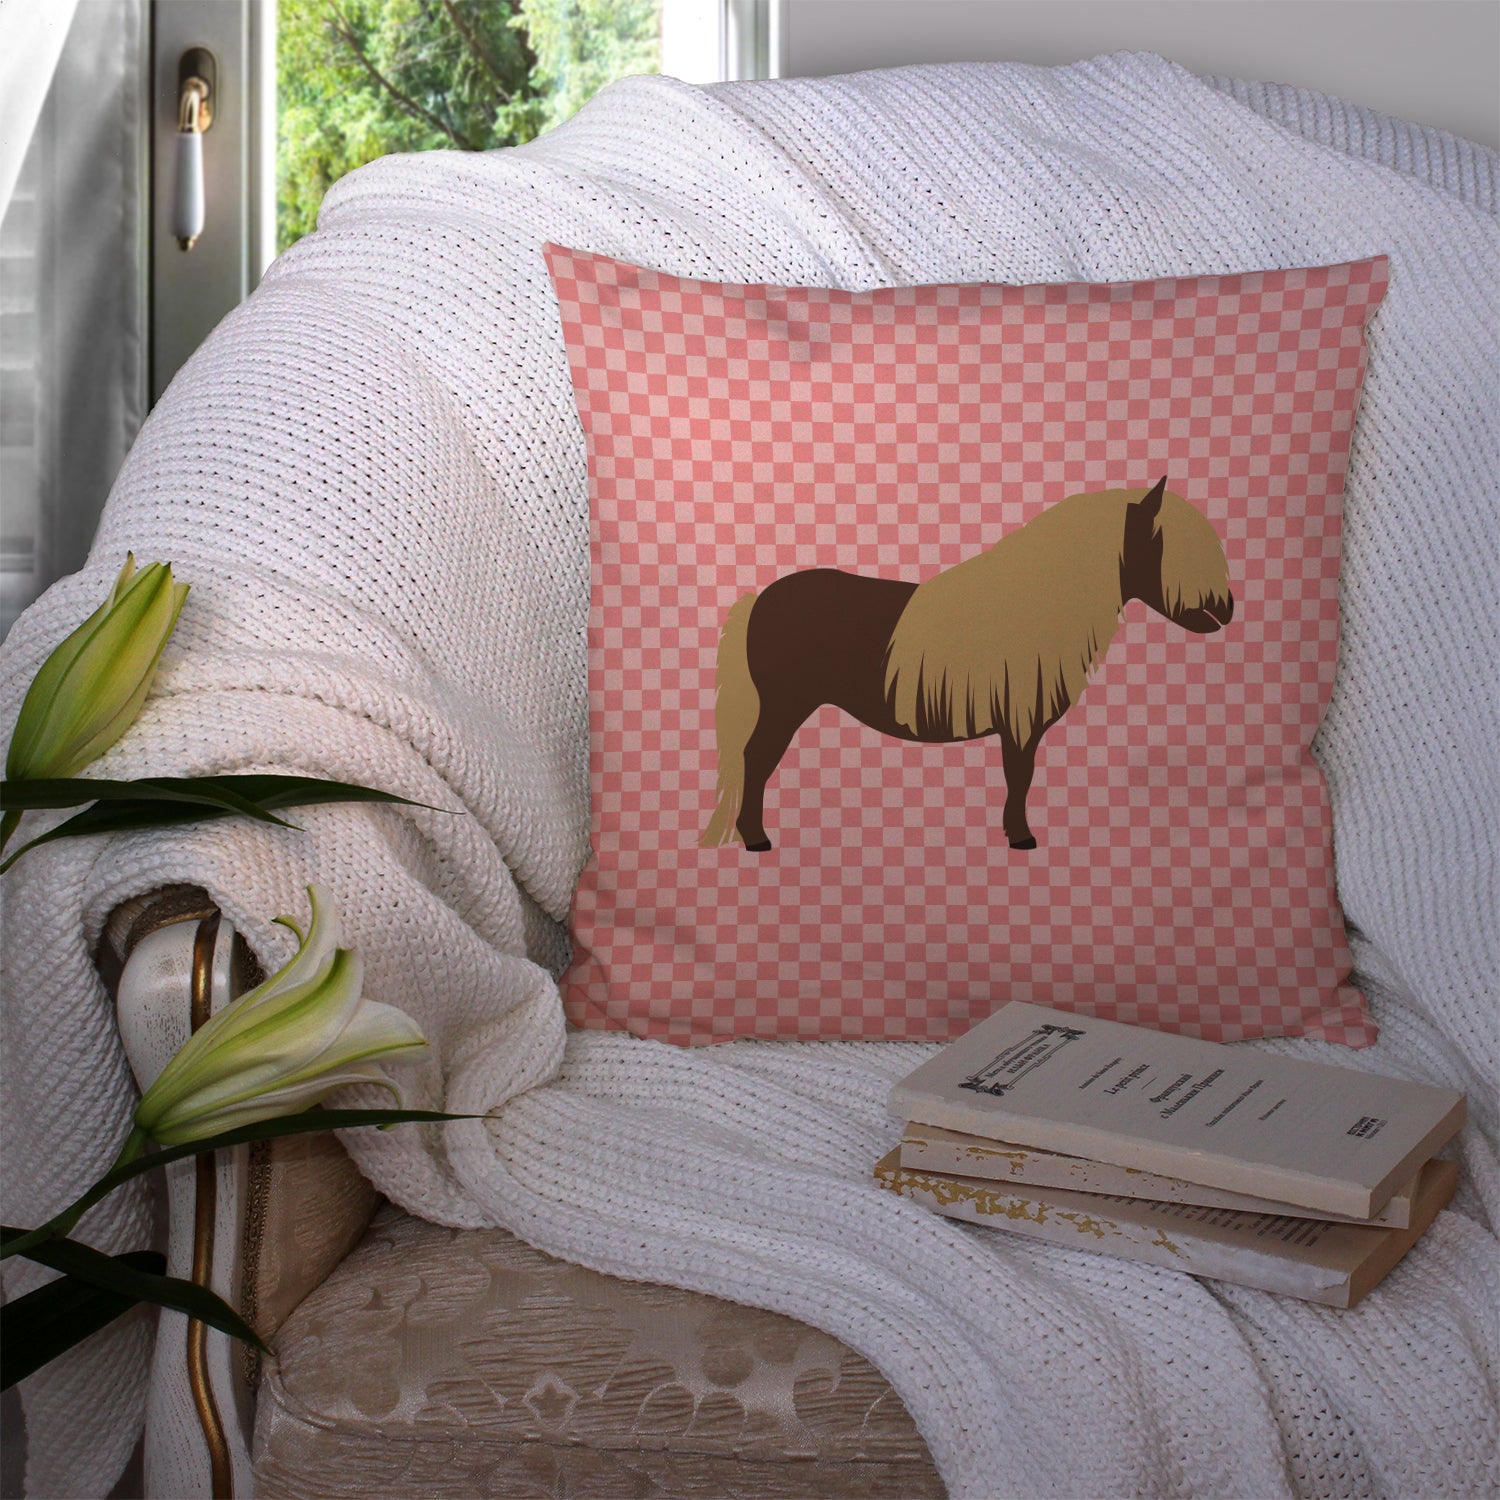 Shetland Pony Horse Pink Check Fabric Decorative Pillow BB7914PW1414 - the-store.com